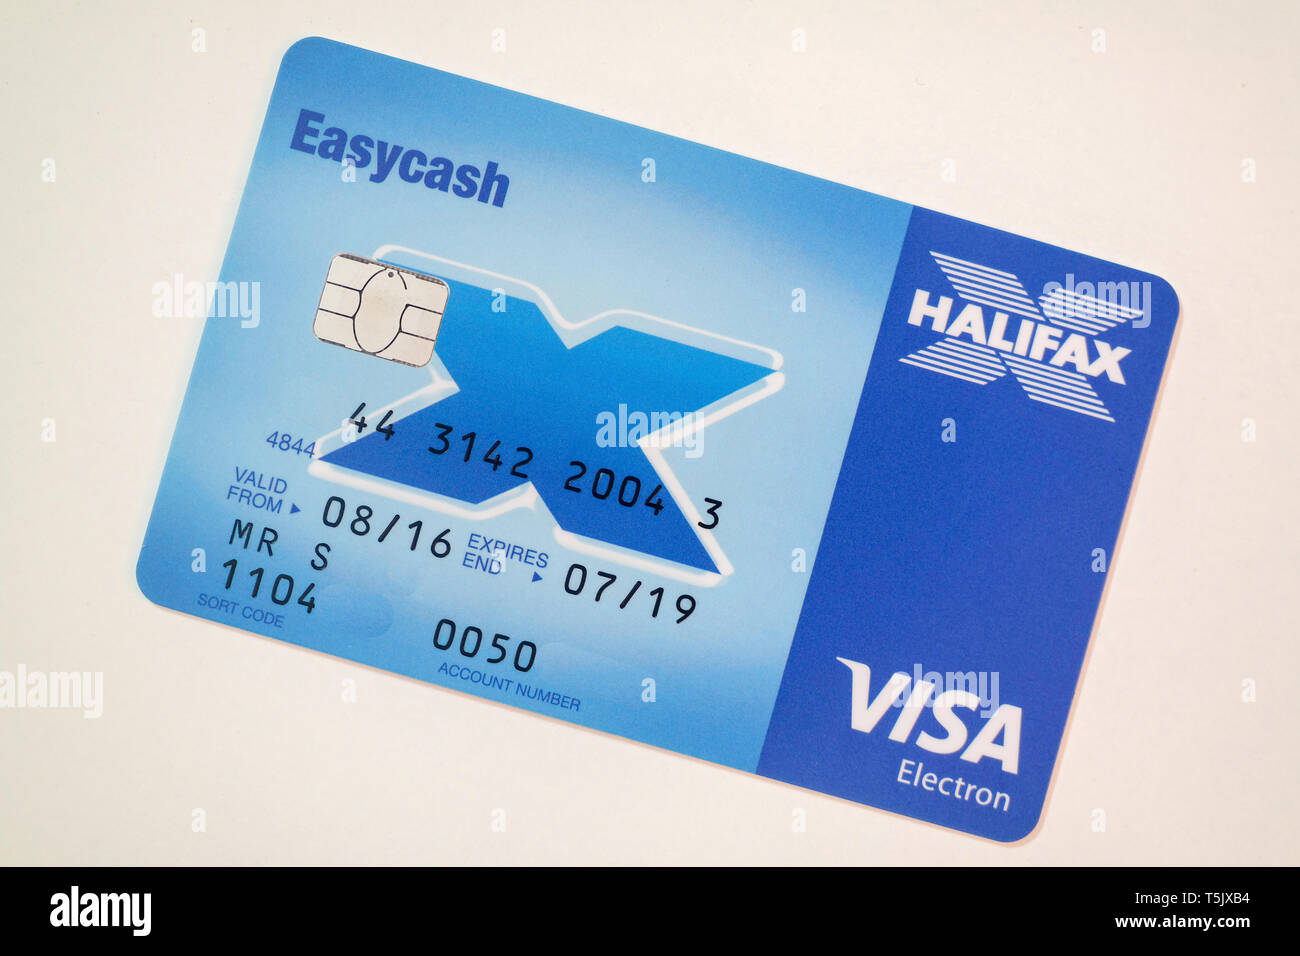 Halifax bank card hi-res stock photography and images - Alamy